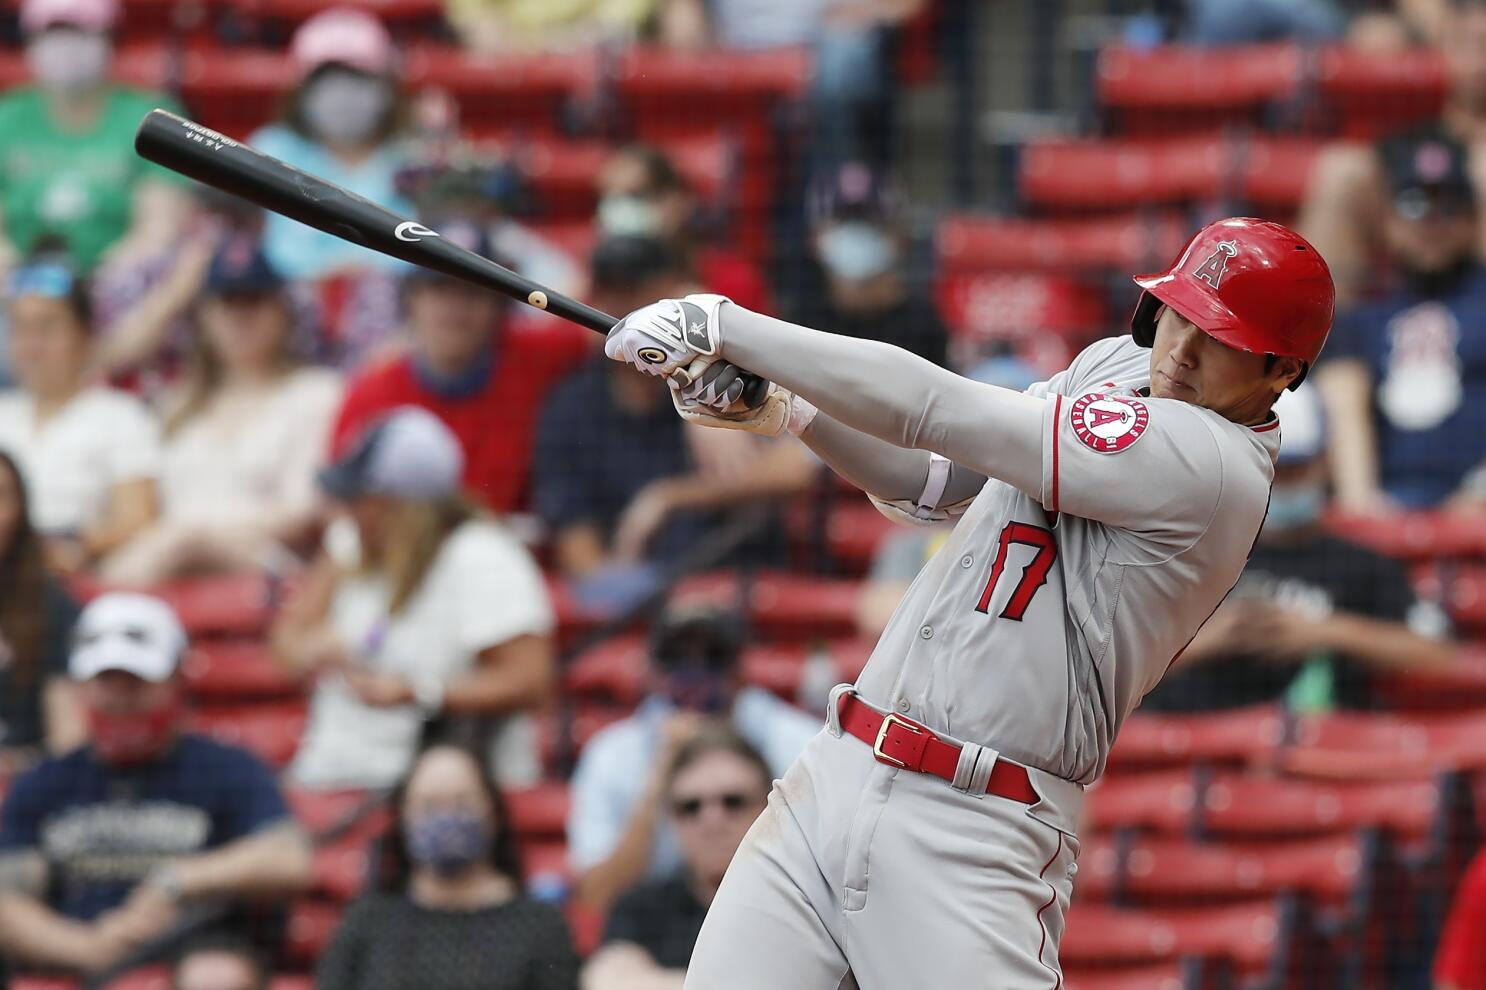 Ohtani's 12th homer lifts Angels over Red Sox 6-5 - The San Diego